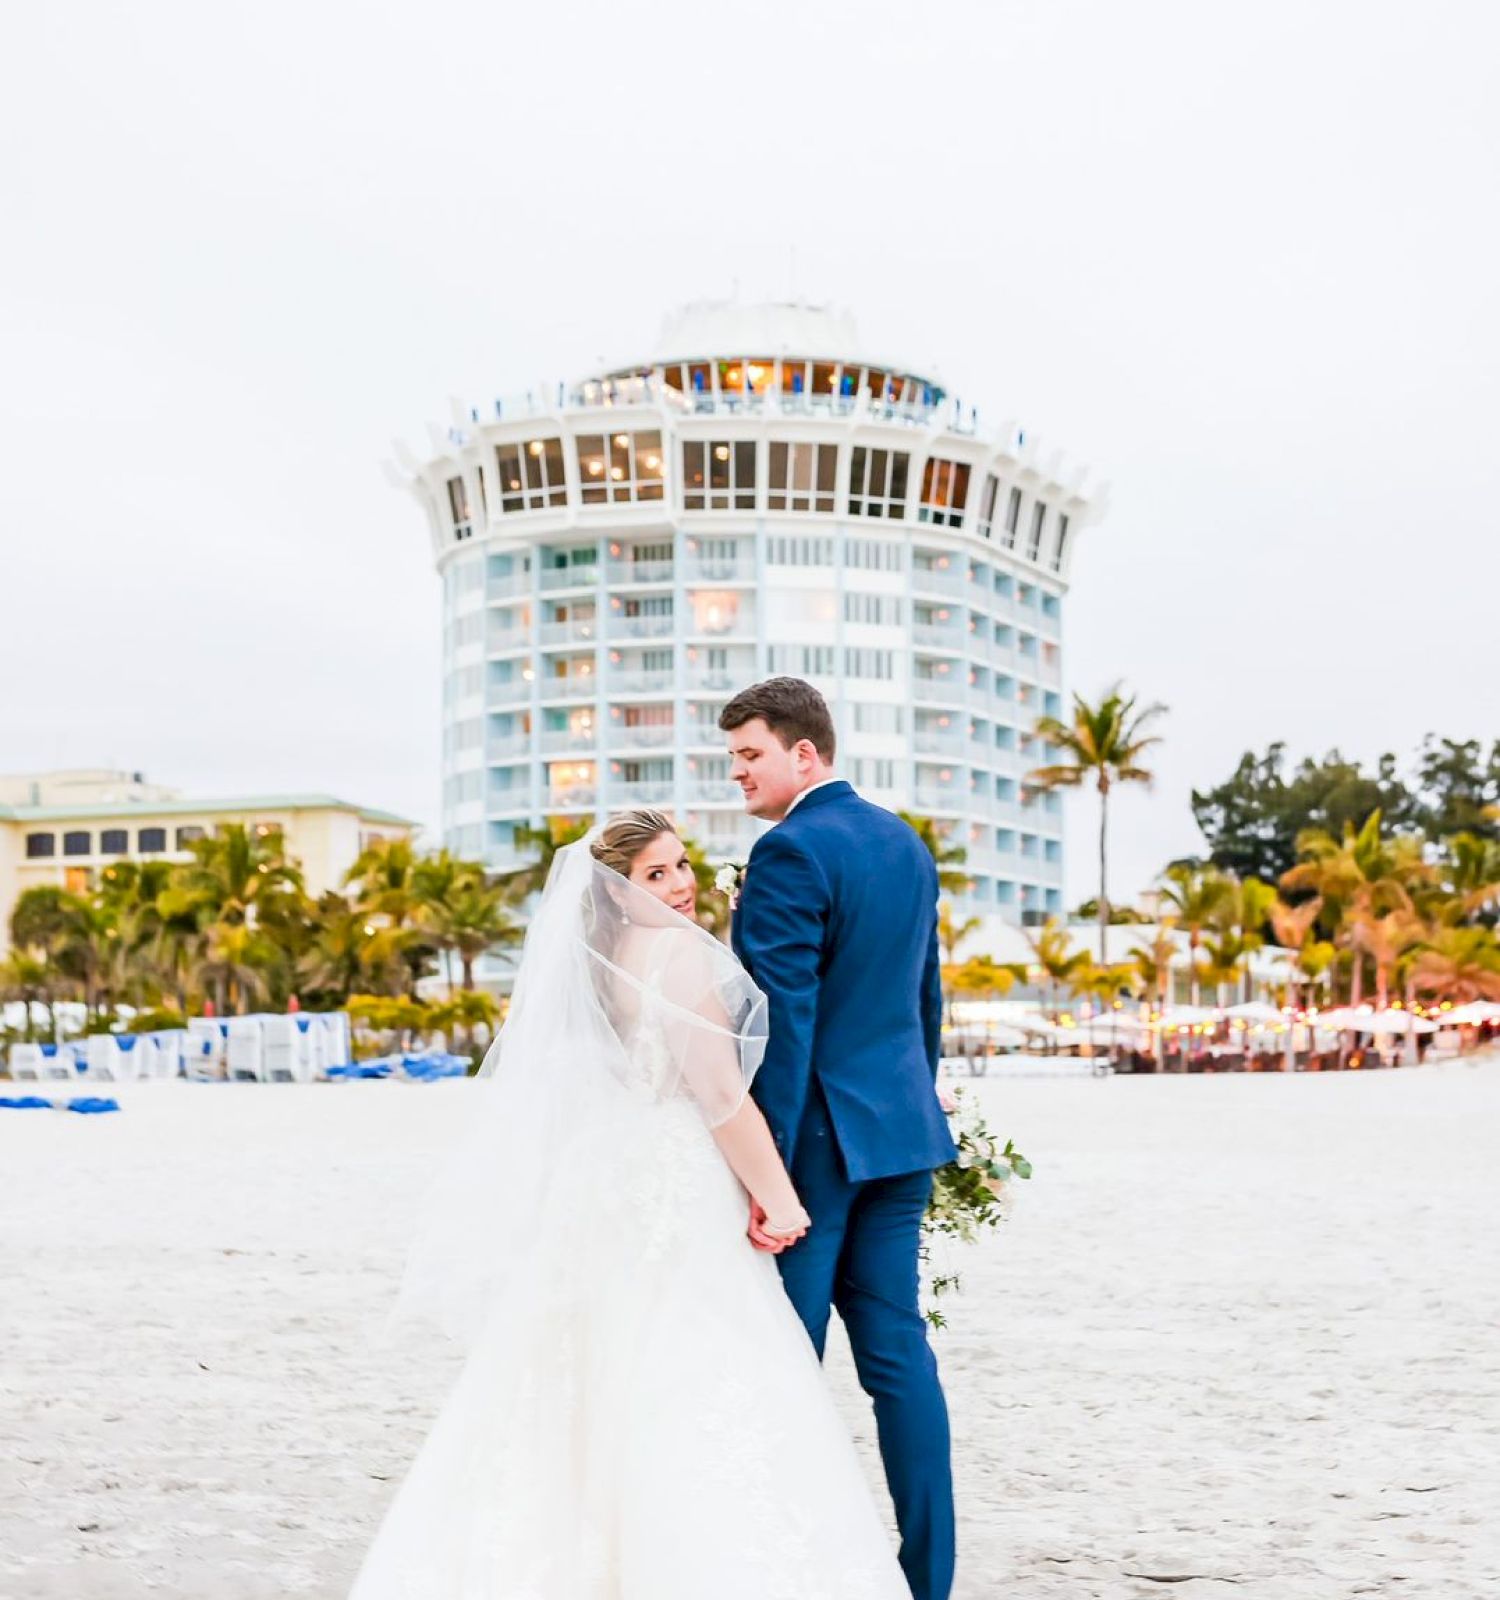 A couple in wedding attire holding hands on a beach, with a building in the background.